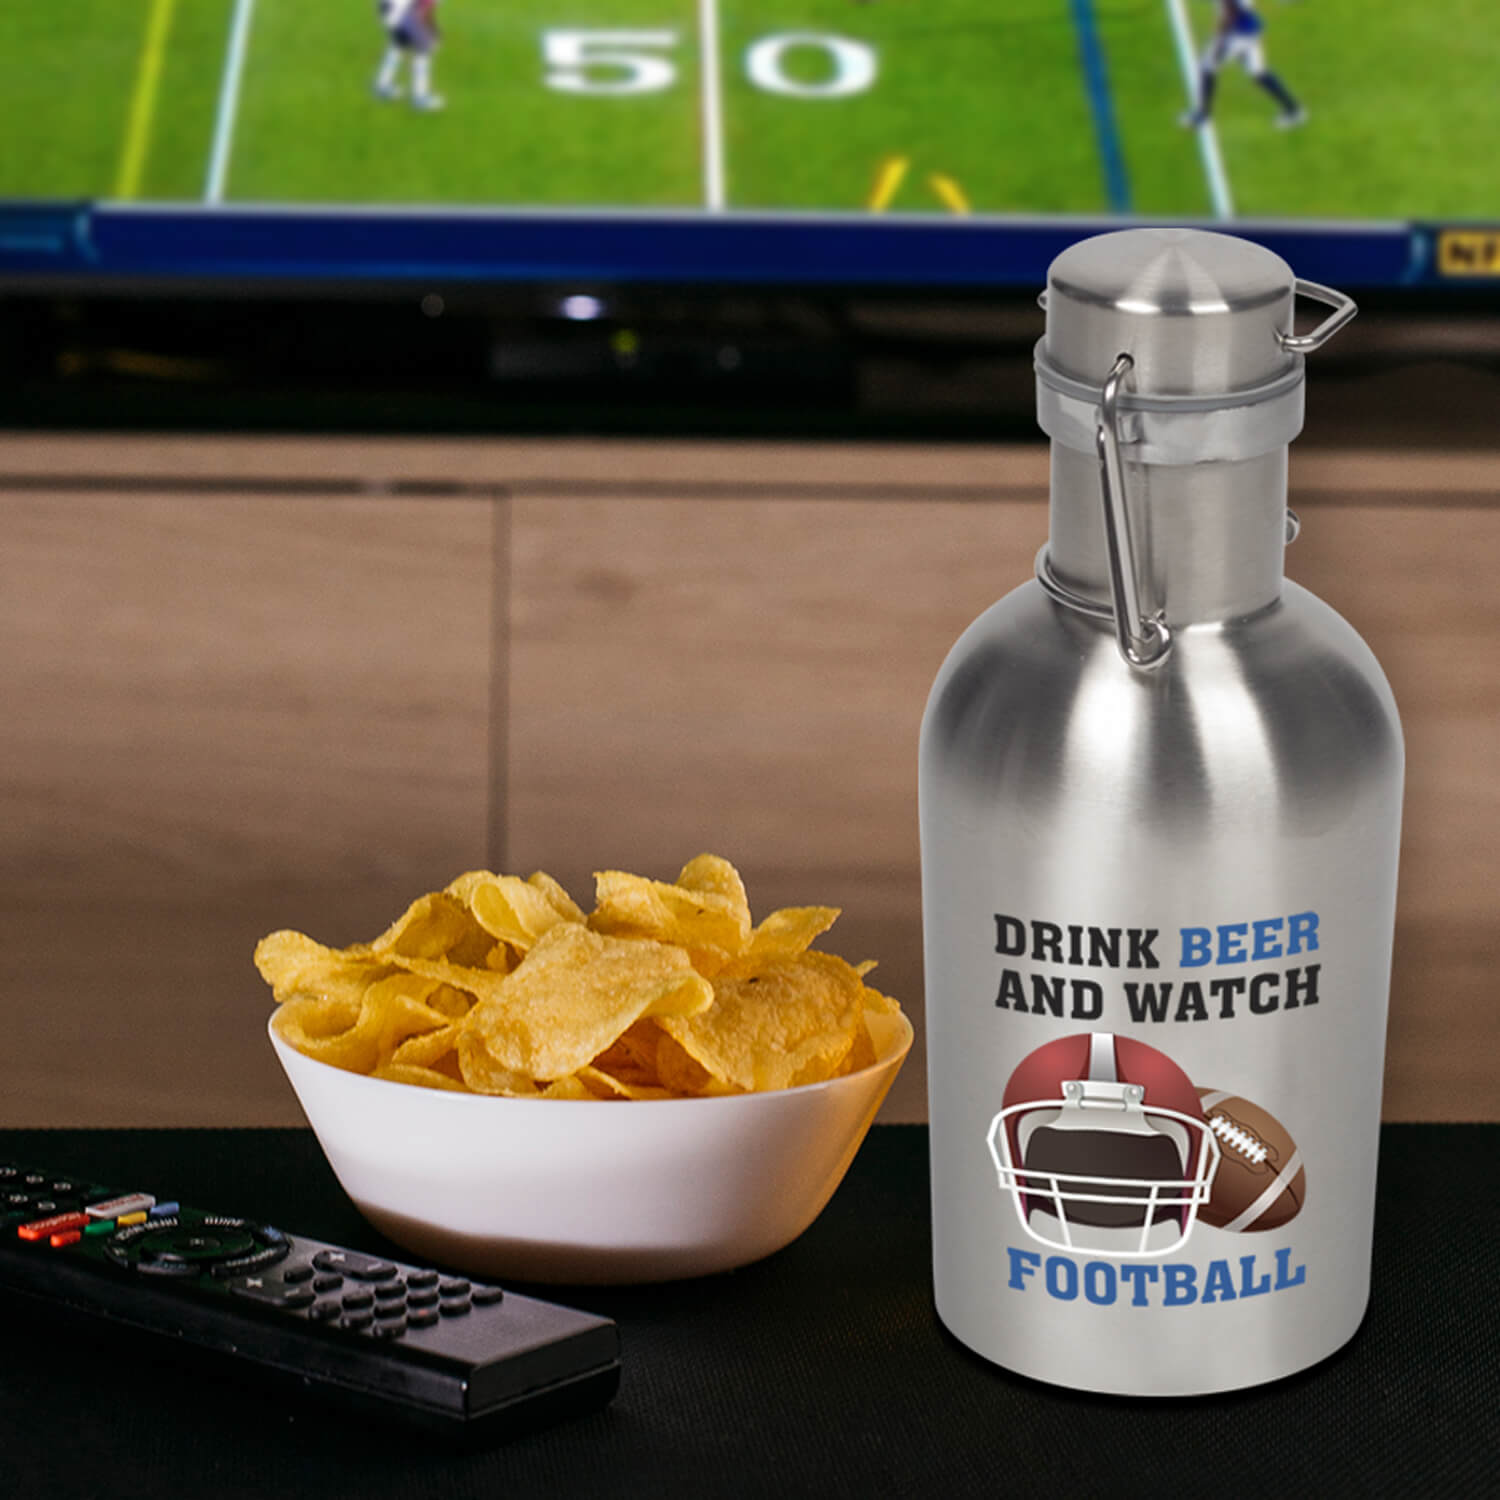 customized stainless steel growler on a table with a bowl of chips and a remote control